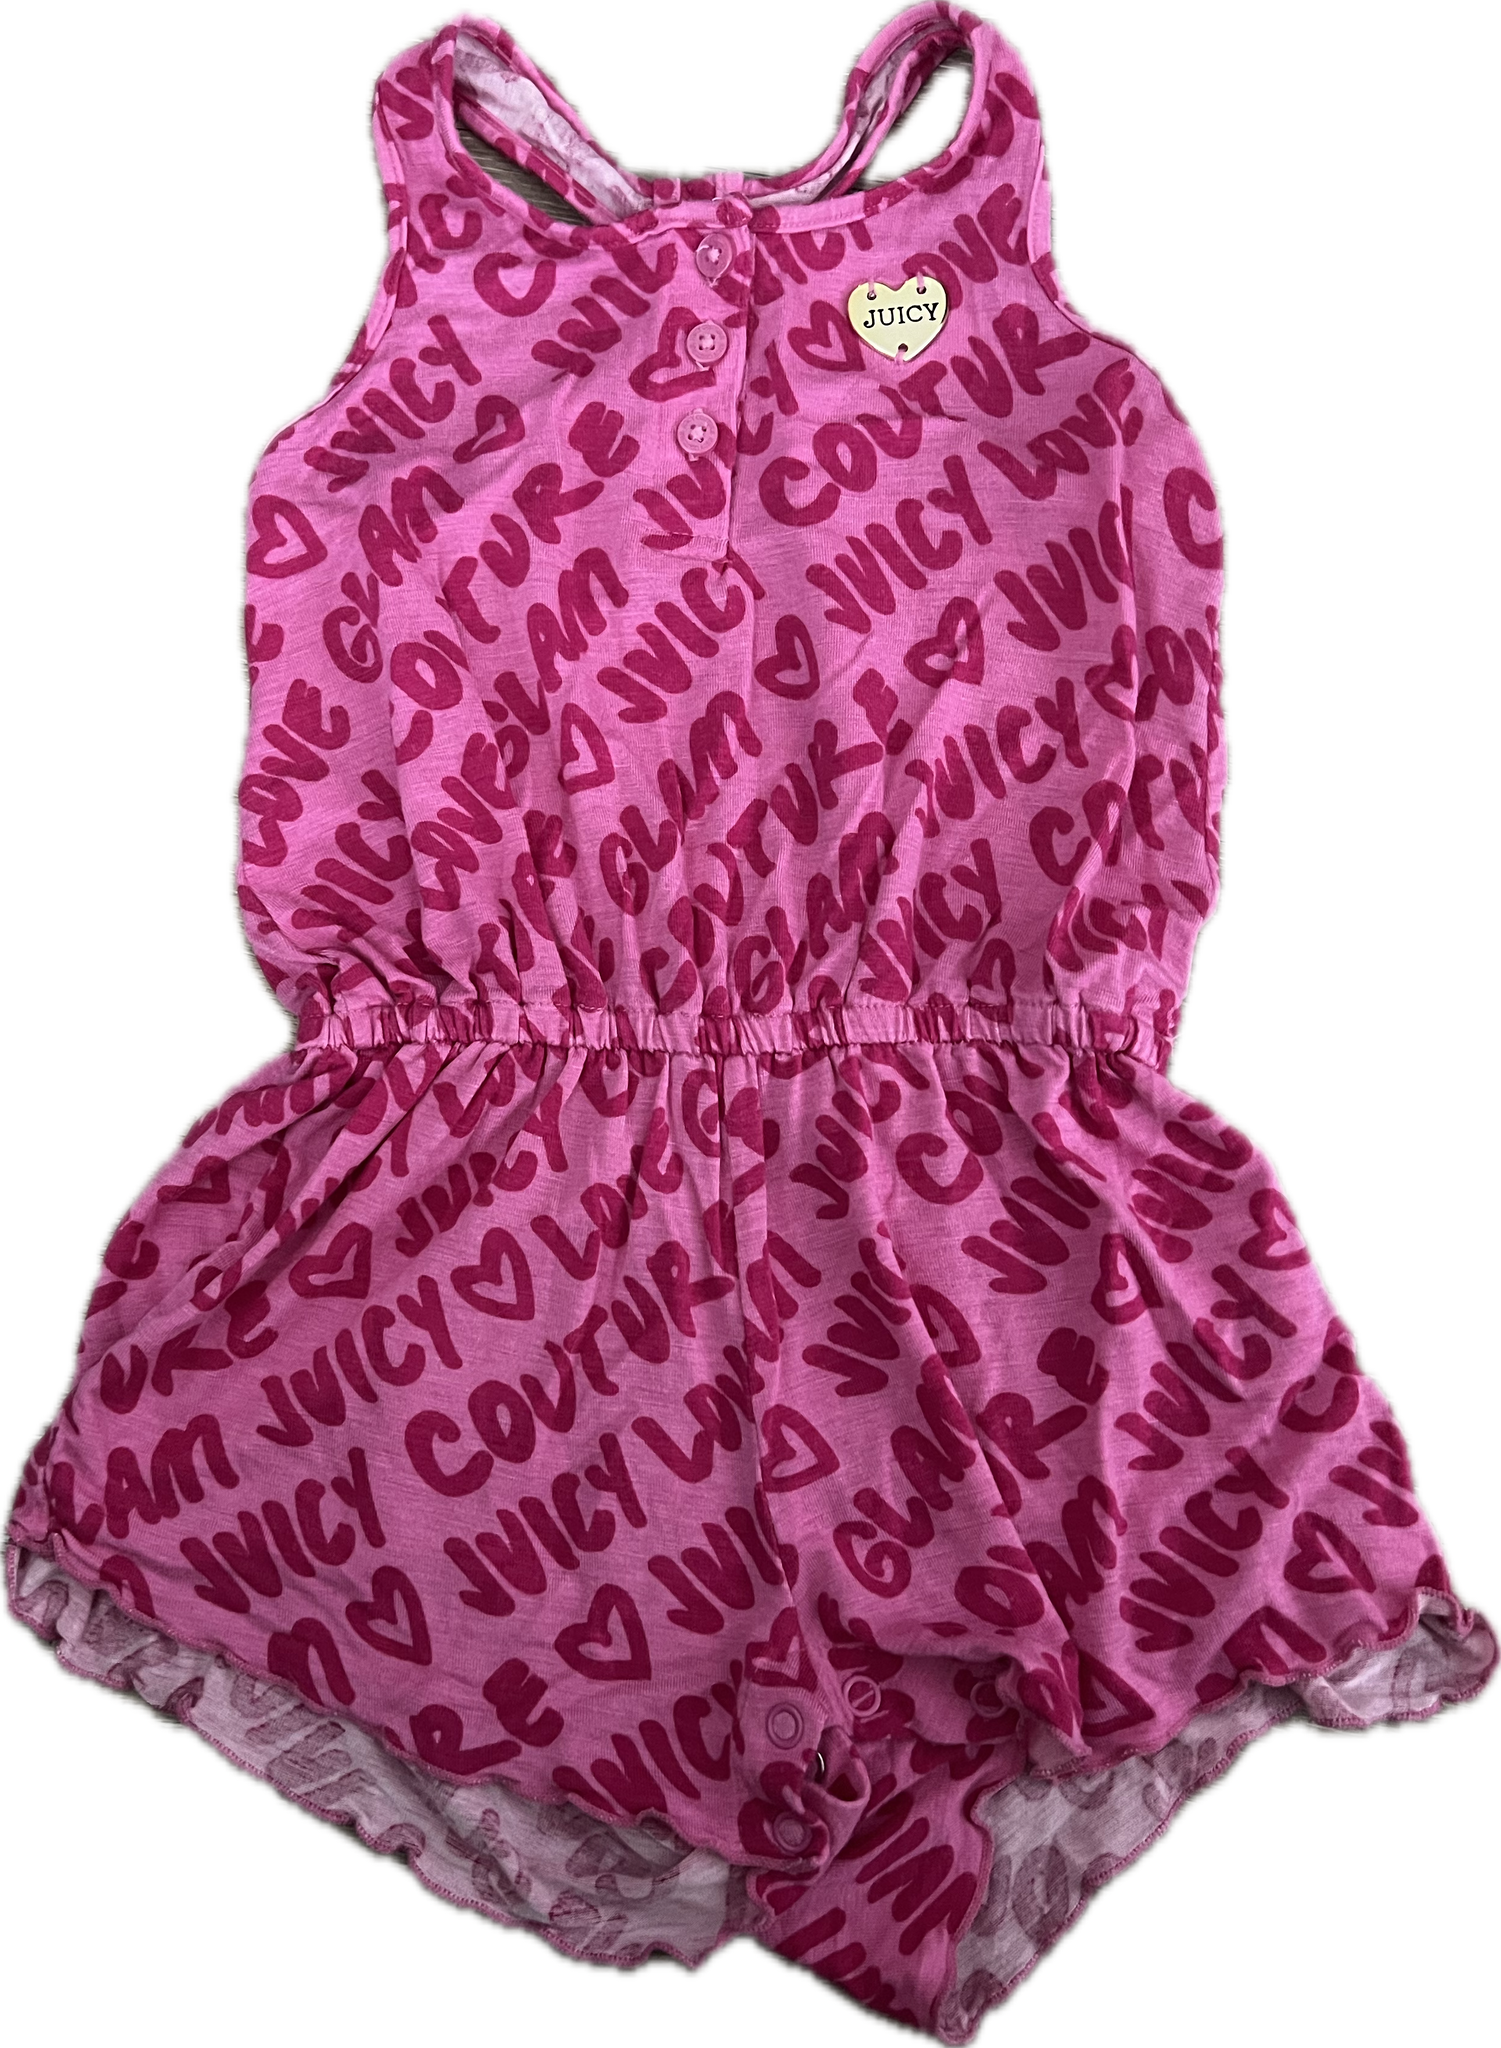 Girls Infant 24 MO Juicy Couture 1PC Casual